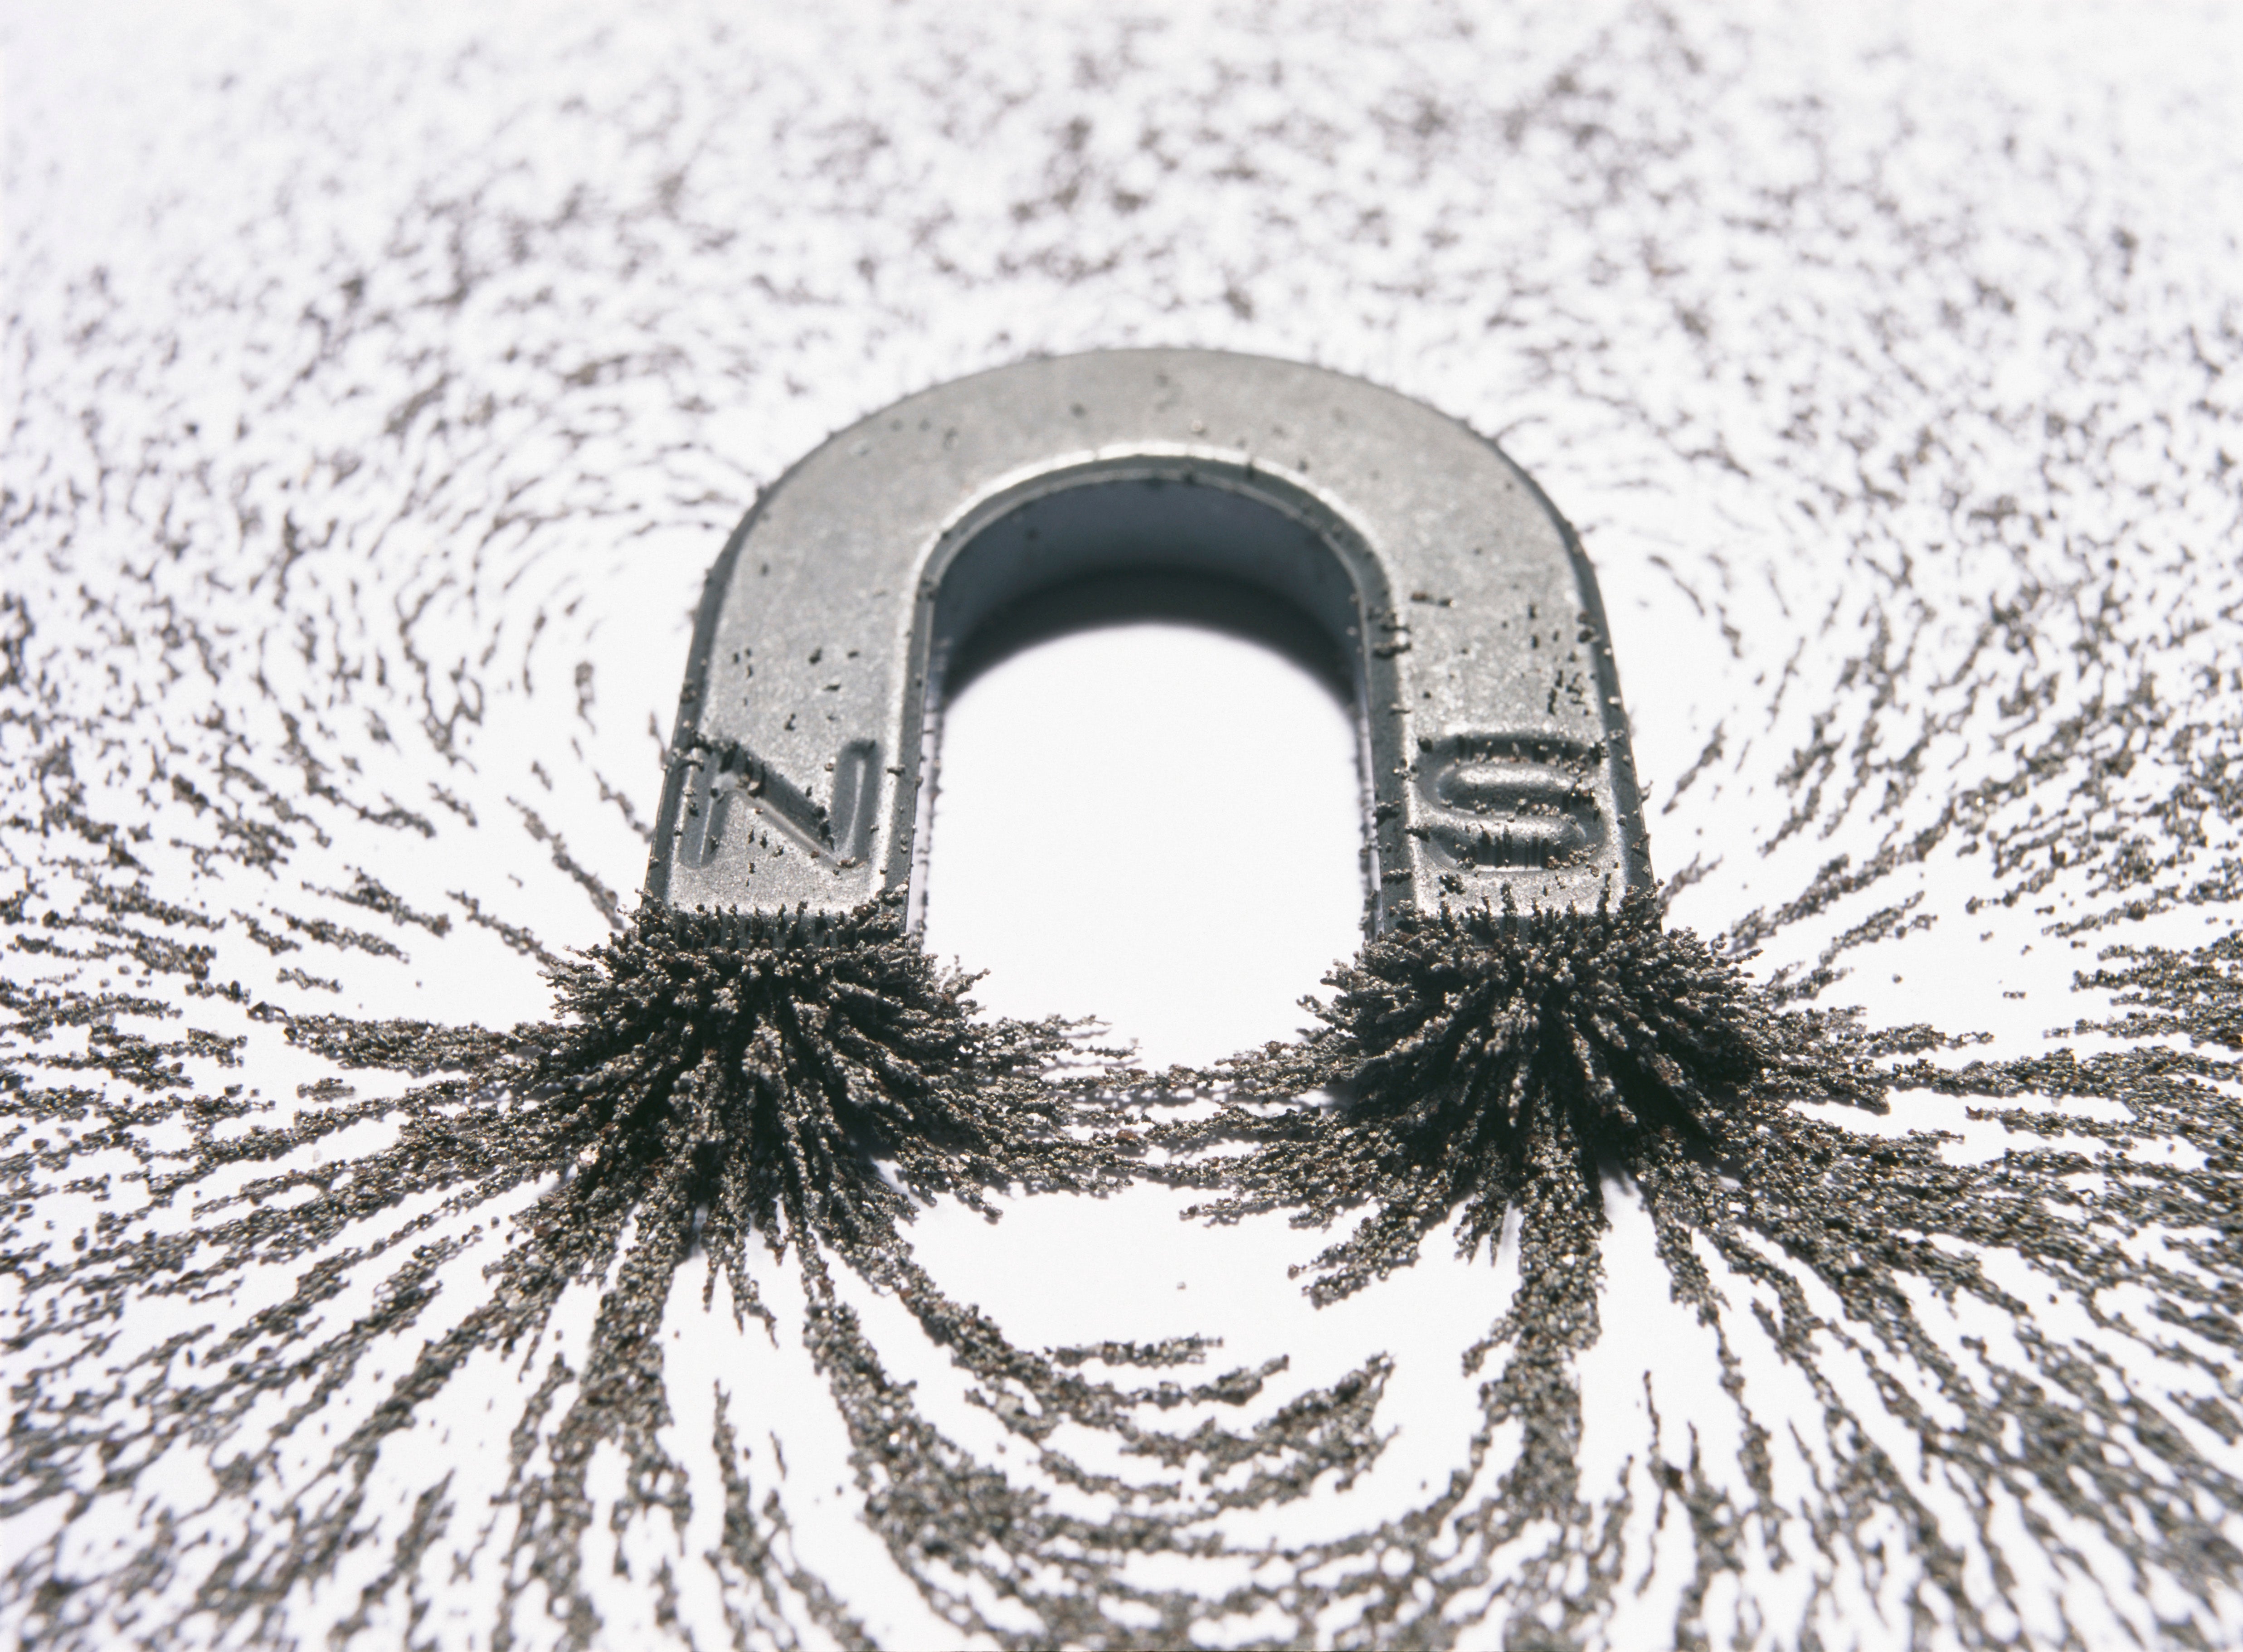 Why don't magnets on some stainless steels? Scientific American